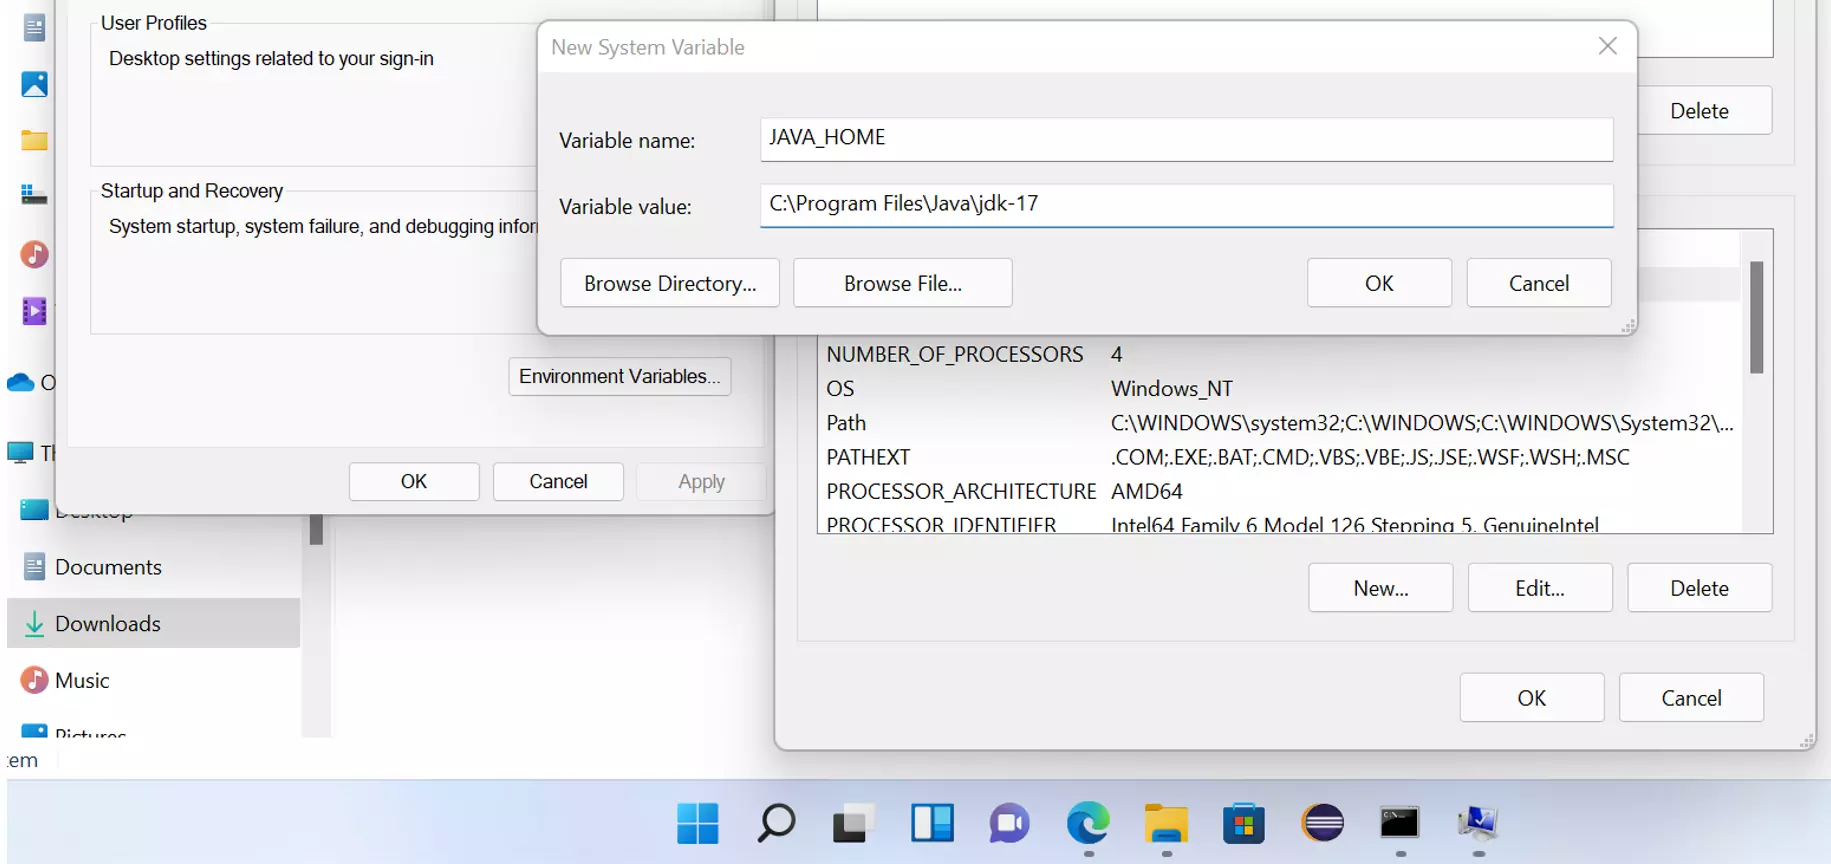 JAVA_HOME New System Variable Windows 11